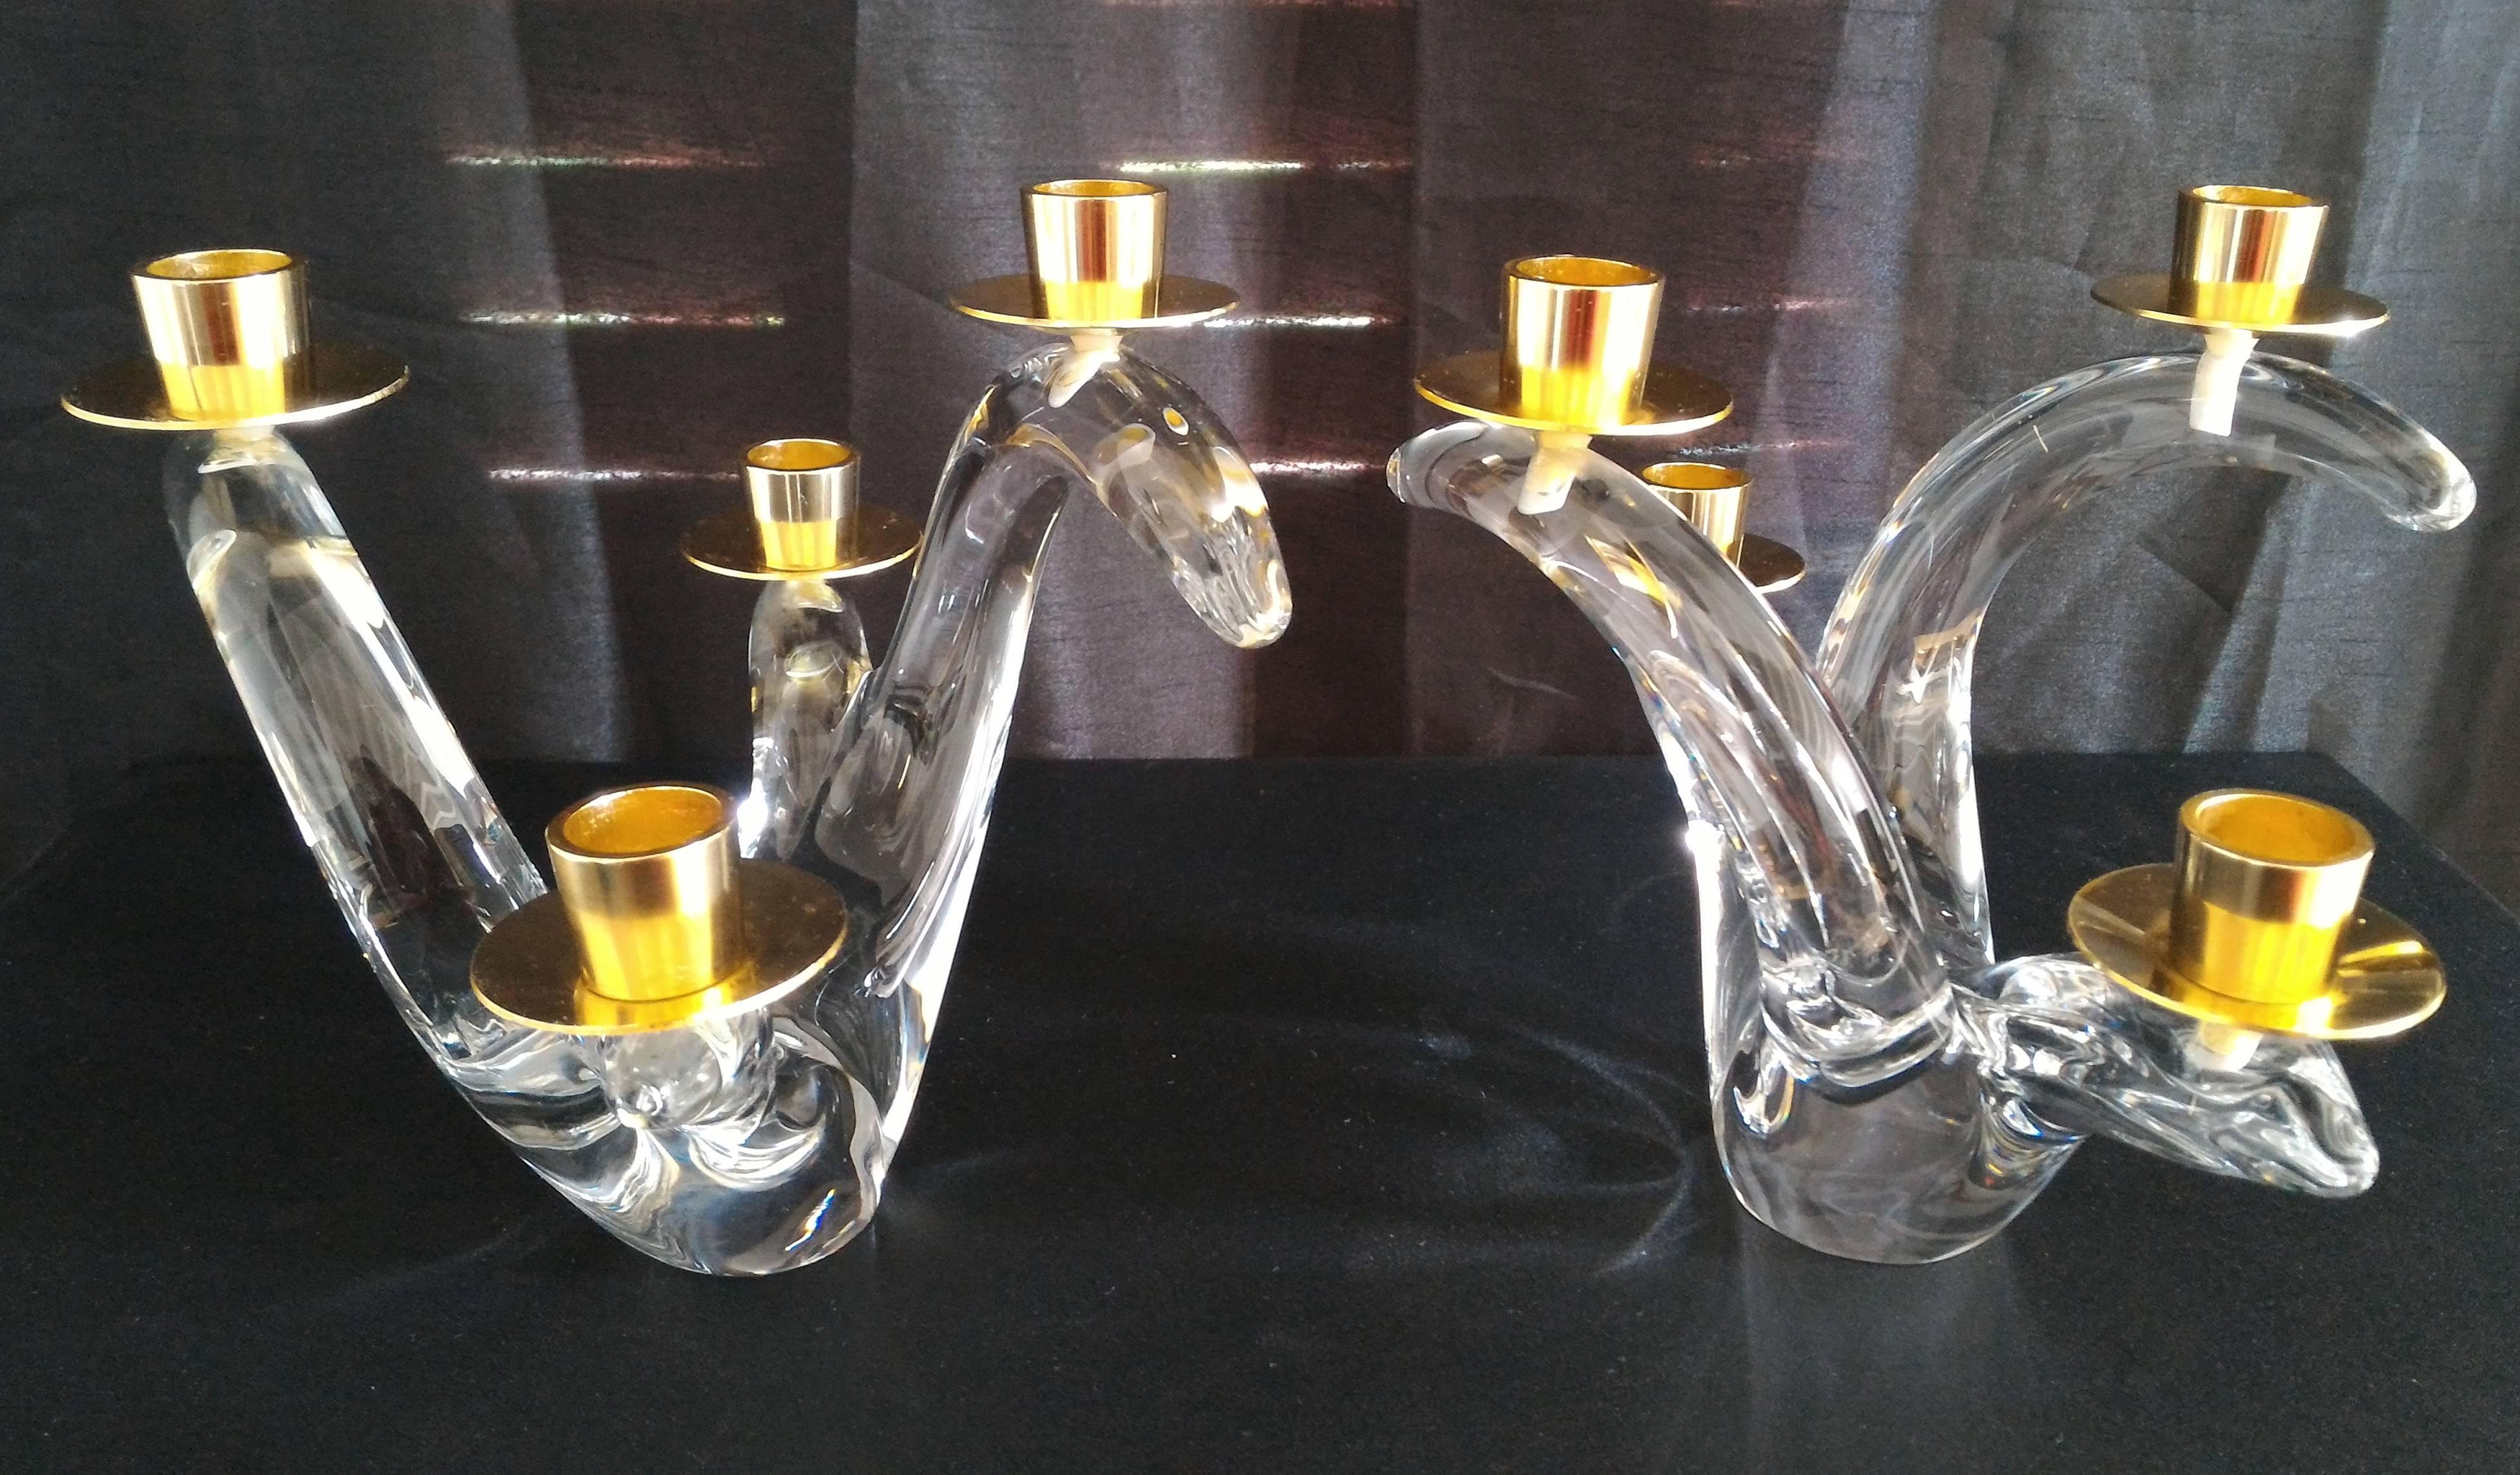 Stunning pair of sculptural Mid-Century Modern crystal candelabra candleholders, signed by Charles Schneider, Schneider, France (Ecole de Nancy) 1950s.
Made in solid heavy crystal with four-arm each, ending with a gilt brass bobeche, in a unique